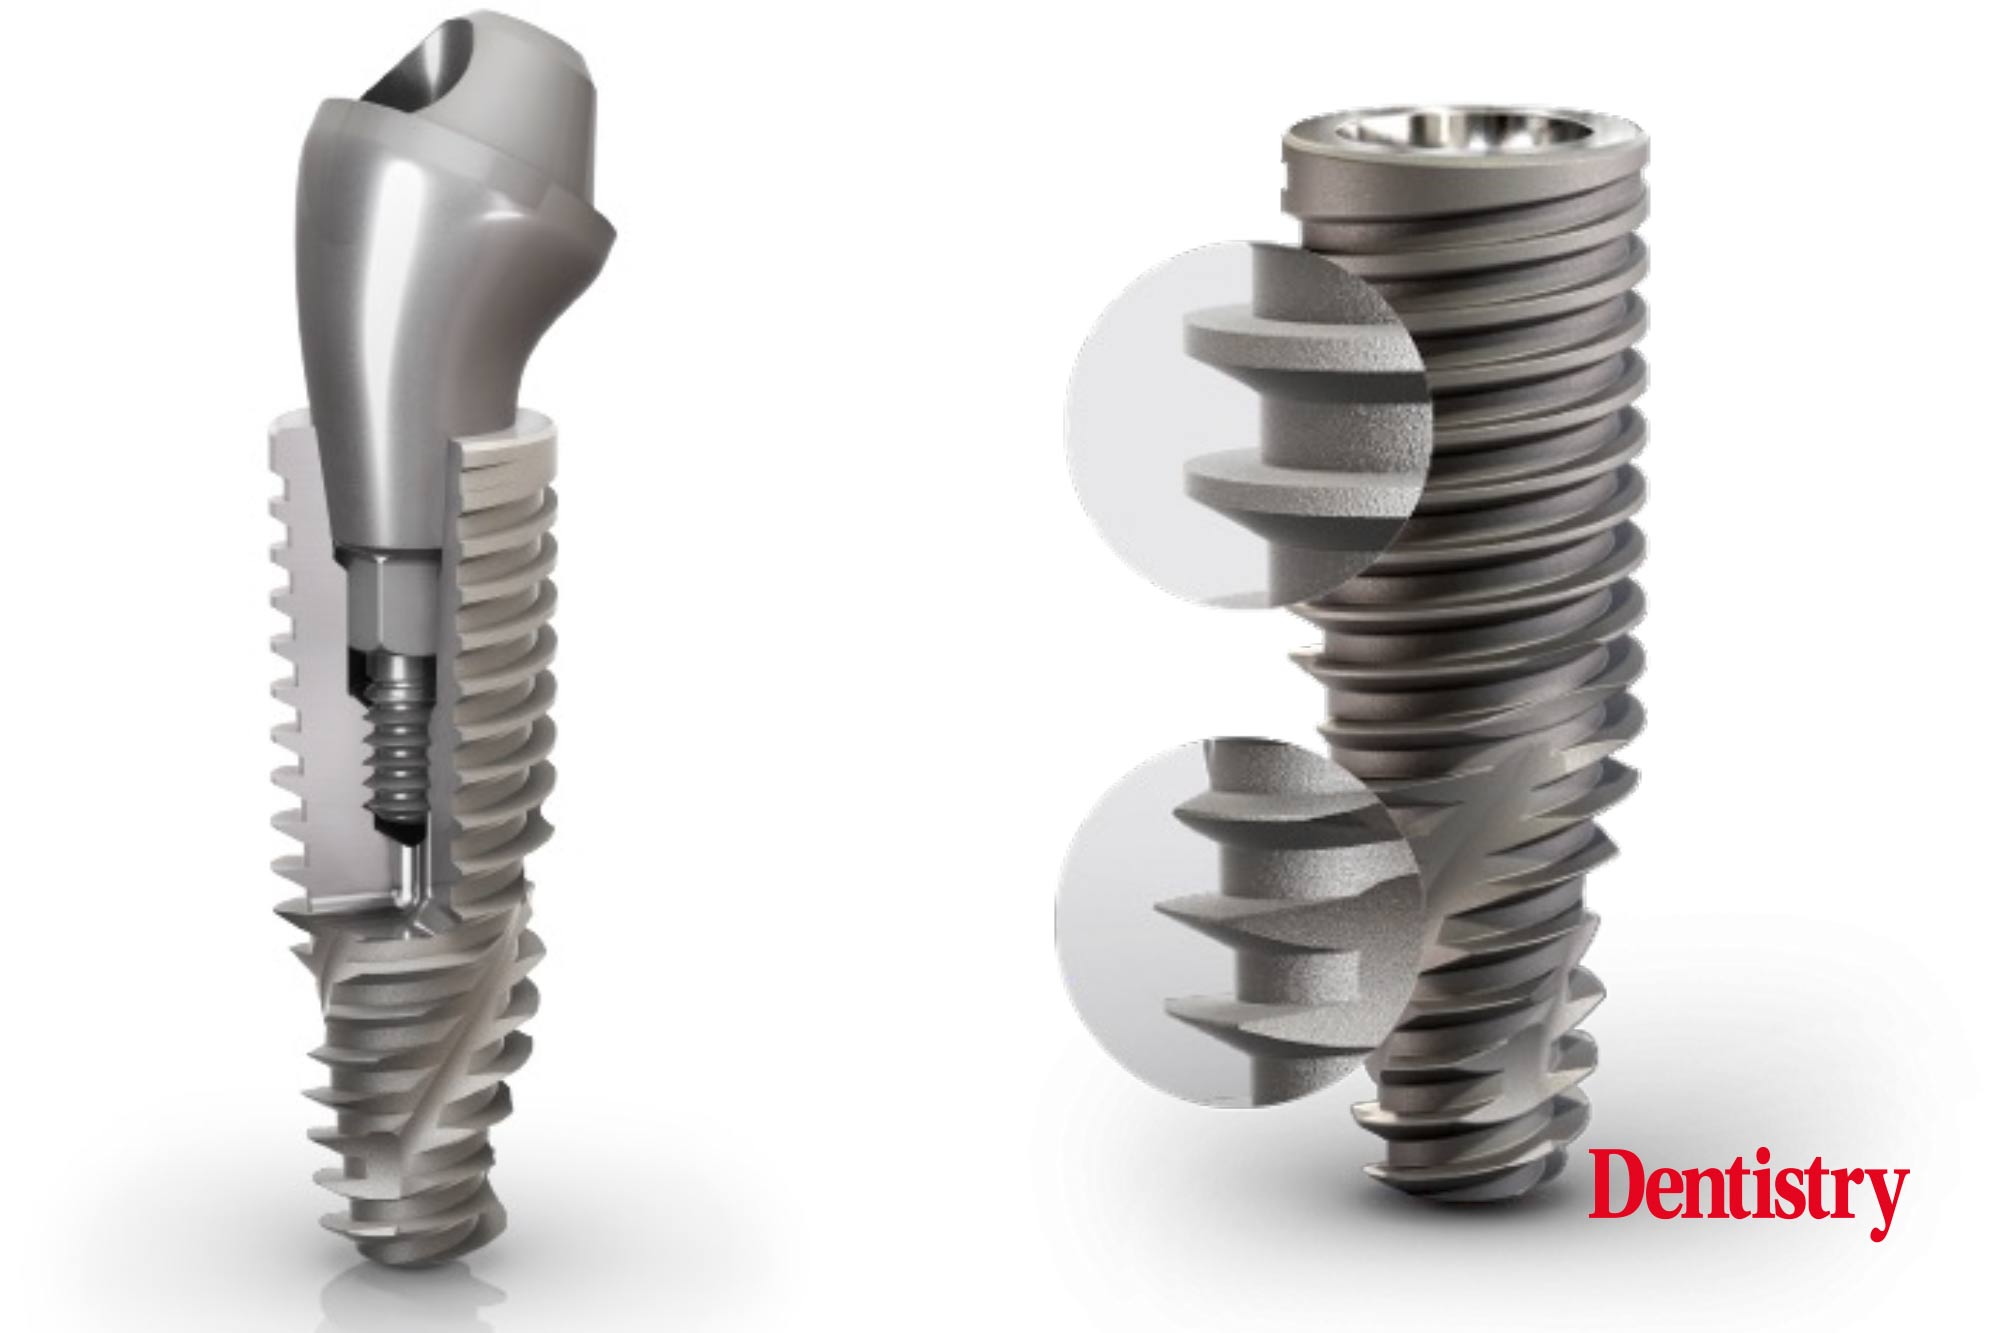 Helix Grand Morse – the versatile solution for all implant cases